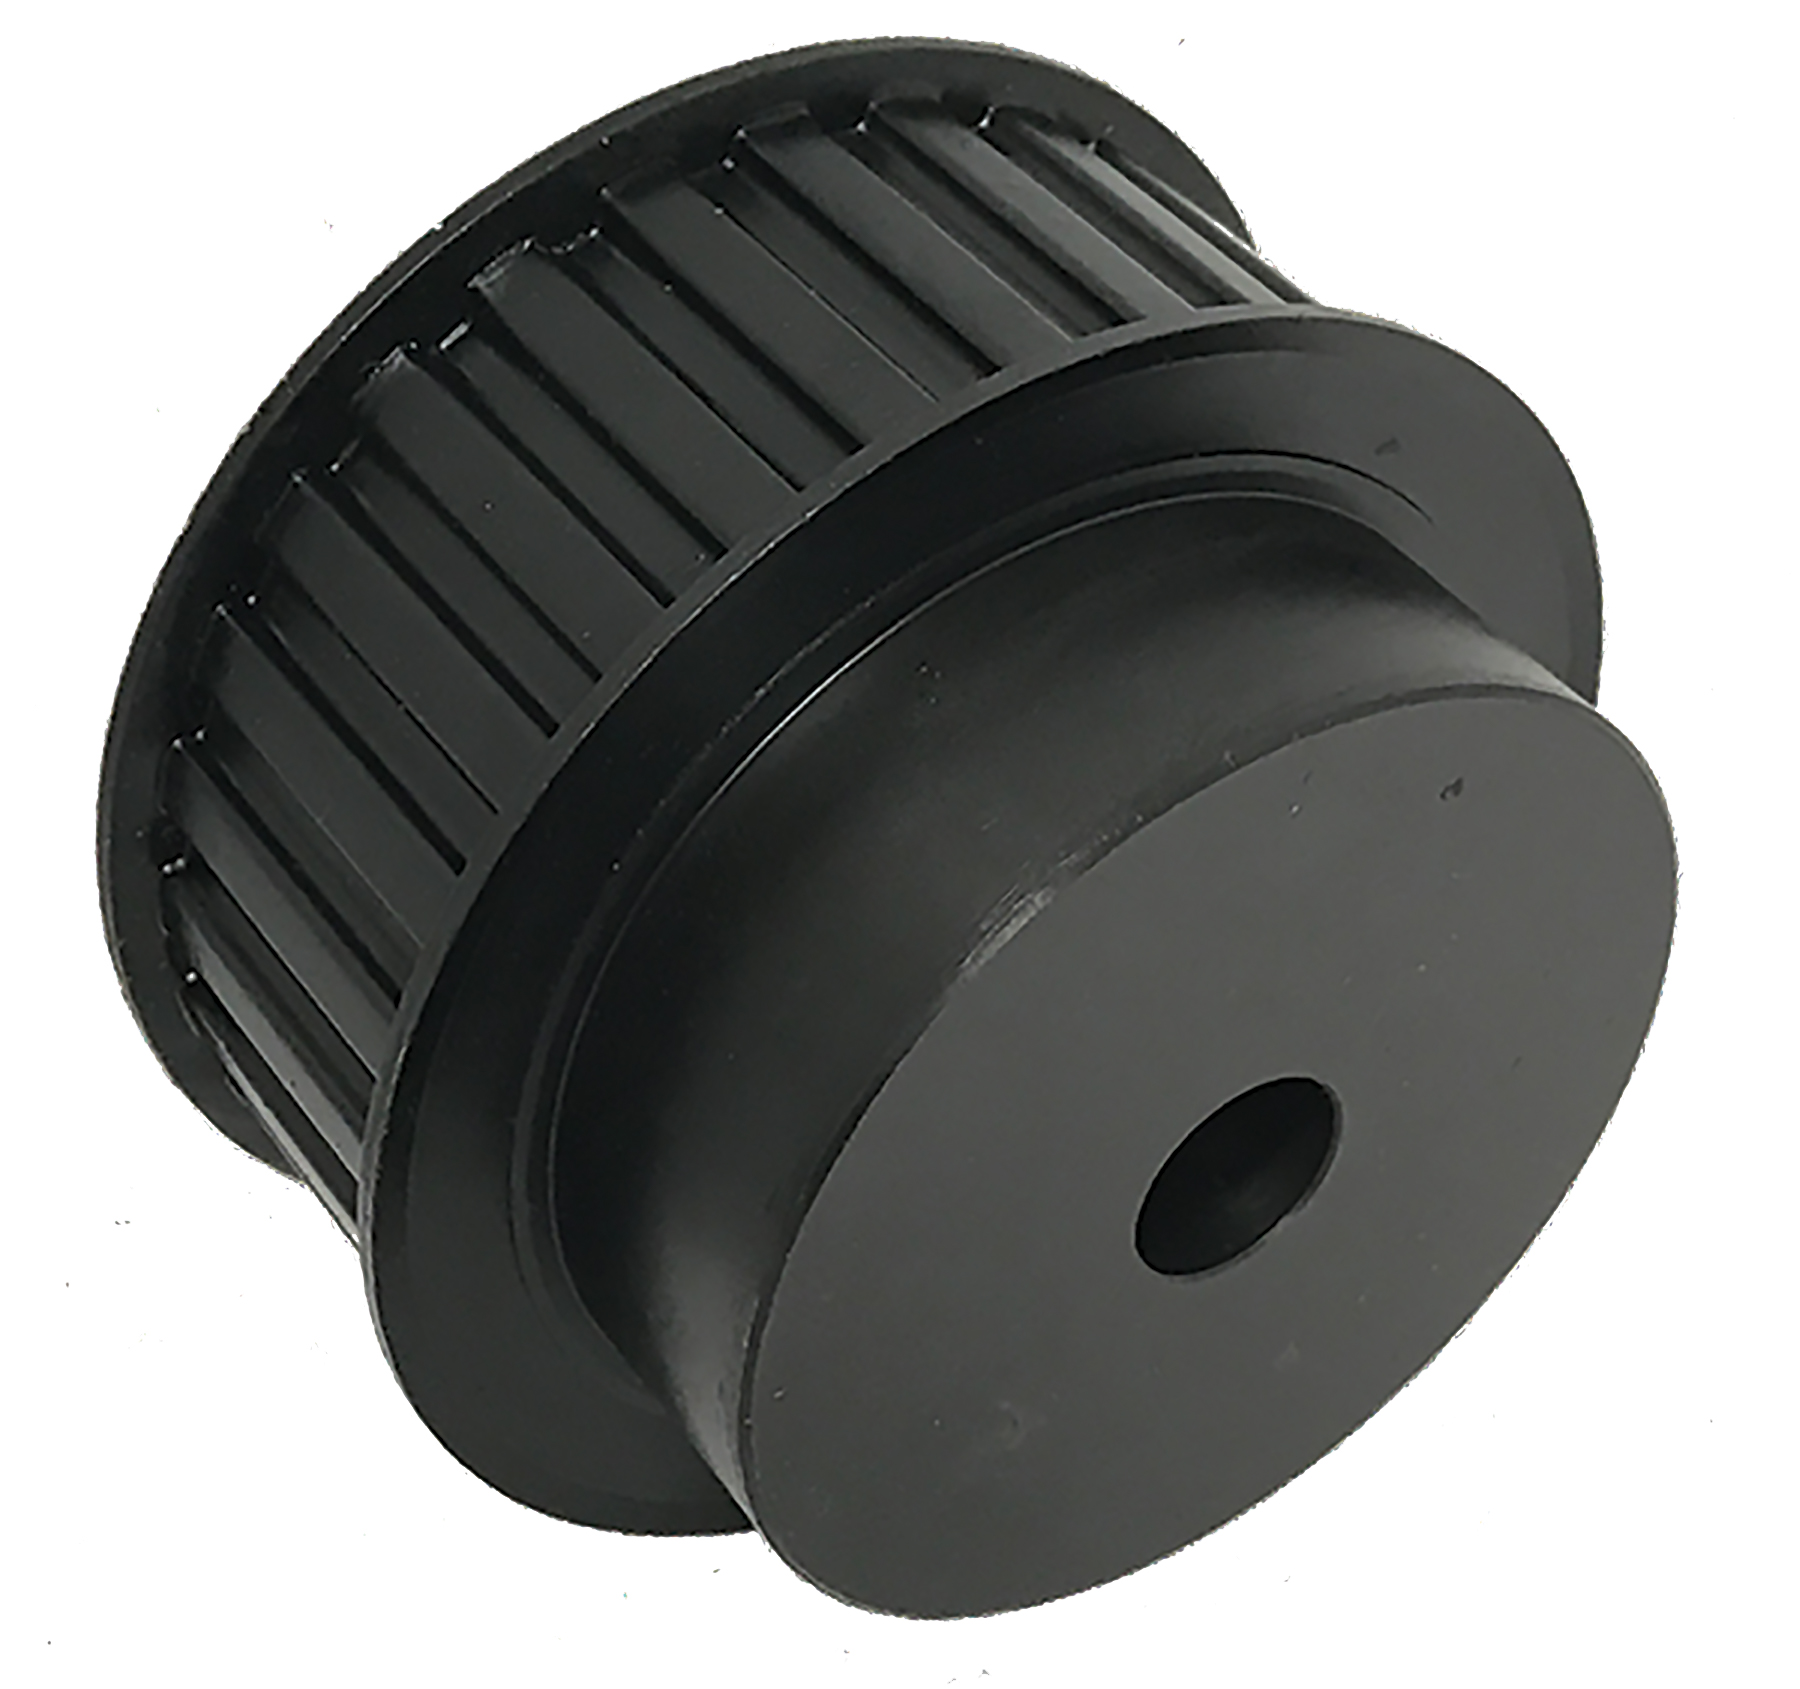 28H150-6FS8 - Steel Imperial Pitch Pulleys